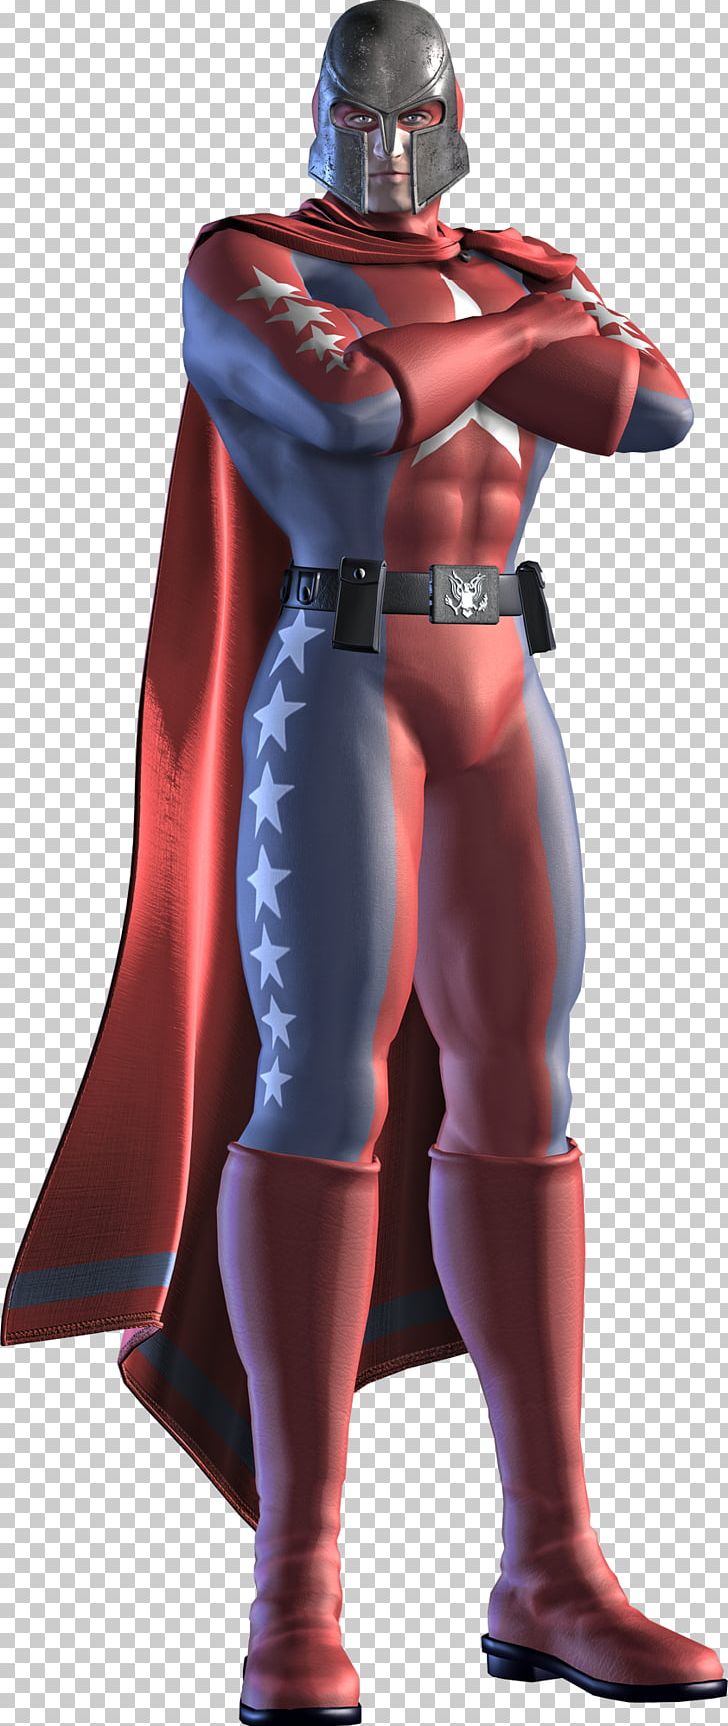 City Of Heroes Superhero Statesman Video Game PNG, Clipart, Action Figure, Character, City, City Of Heroes, Concept Art Free PNG Download